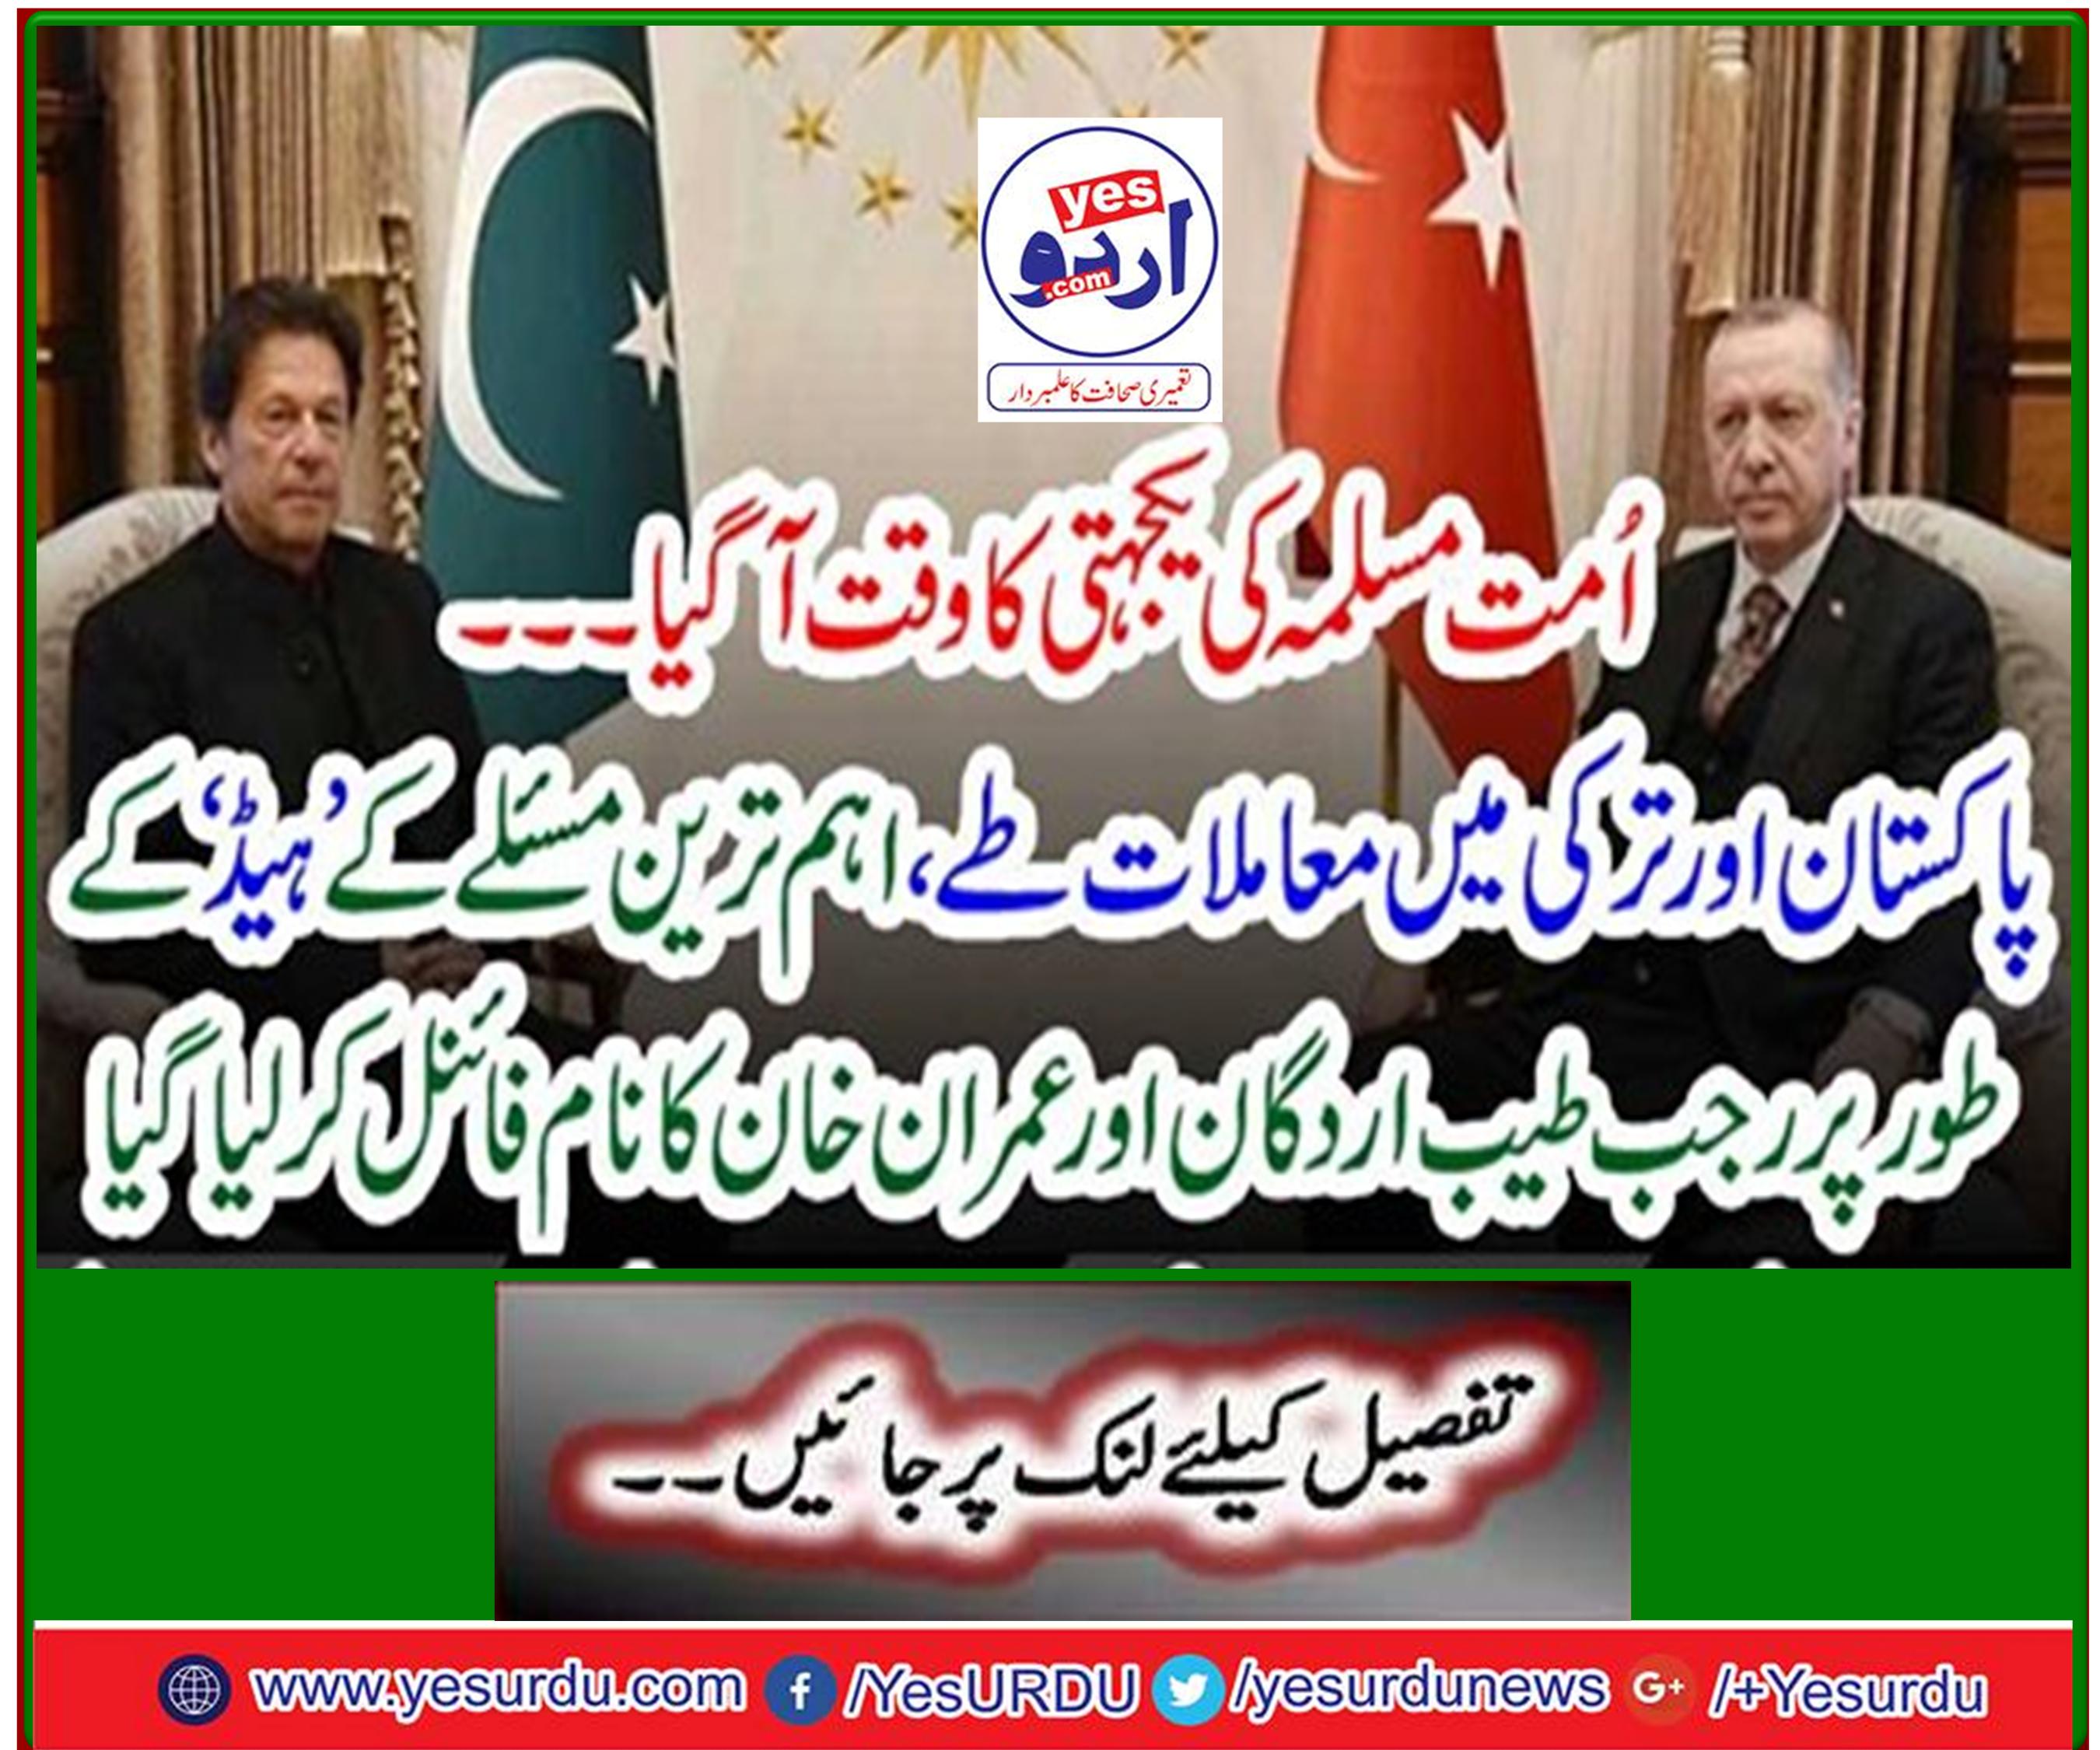 Pakistan, Turkey finalize names of Rajiv Tayyab Erdogan and Imran Khan as the "head" of the most important issue